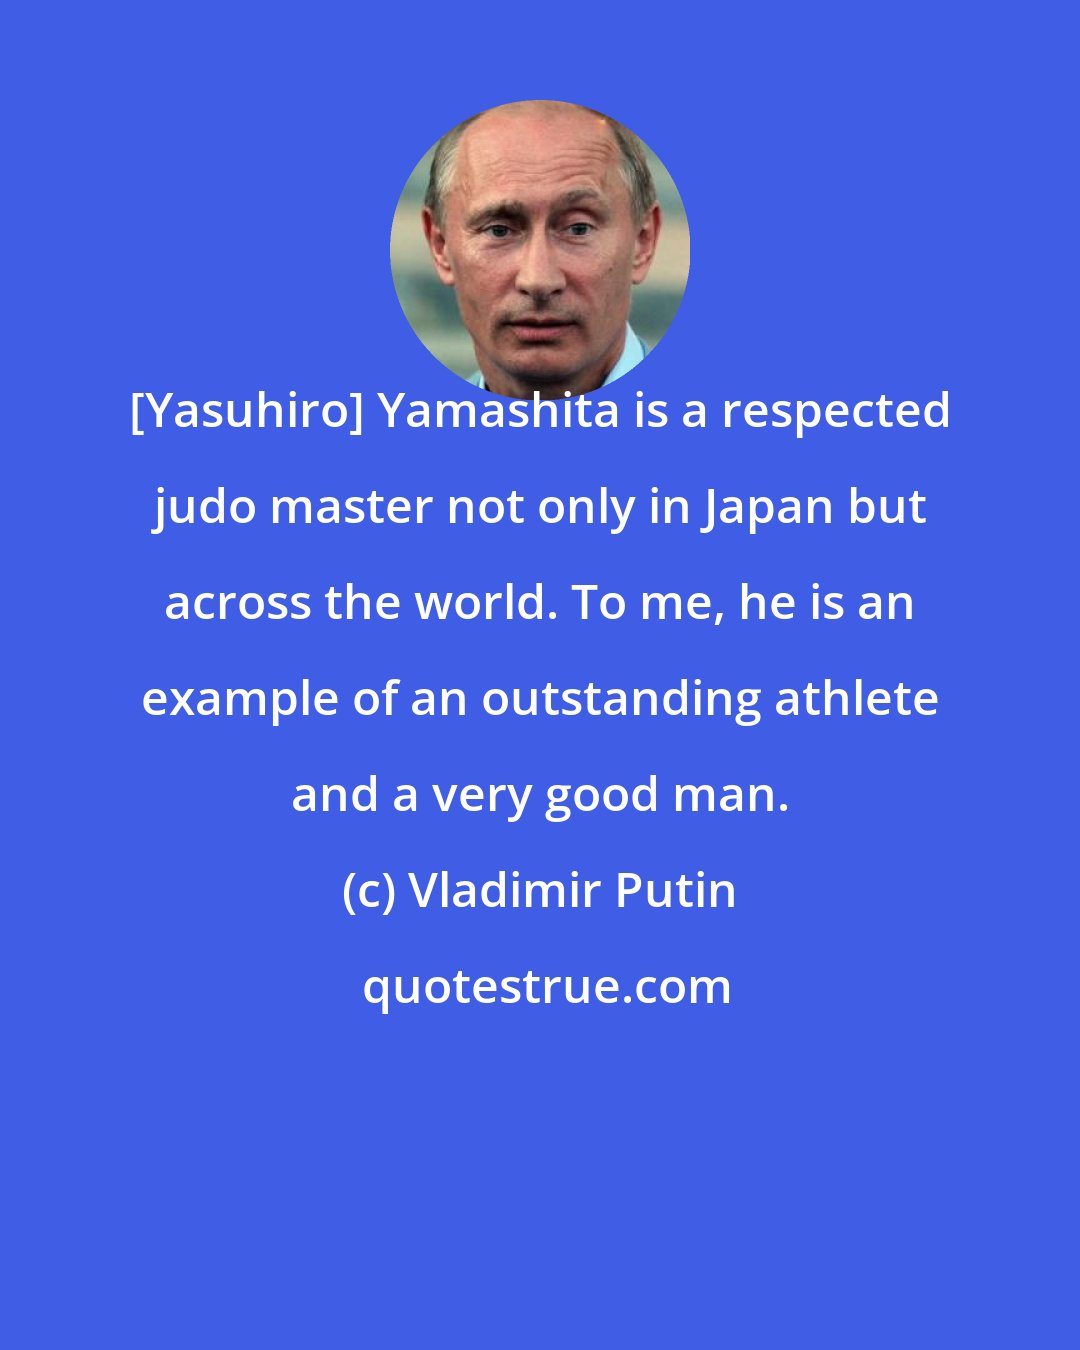 Vladimir Putin: [Yasuhiro] Yamashita is a respected judo master not only in Japan but across the world. To me, he is an example of an outstanding athlete and a very good man.